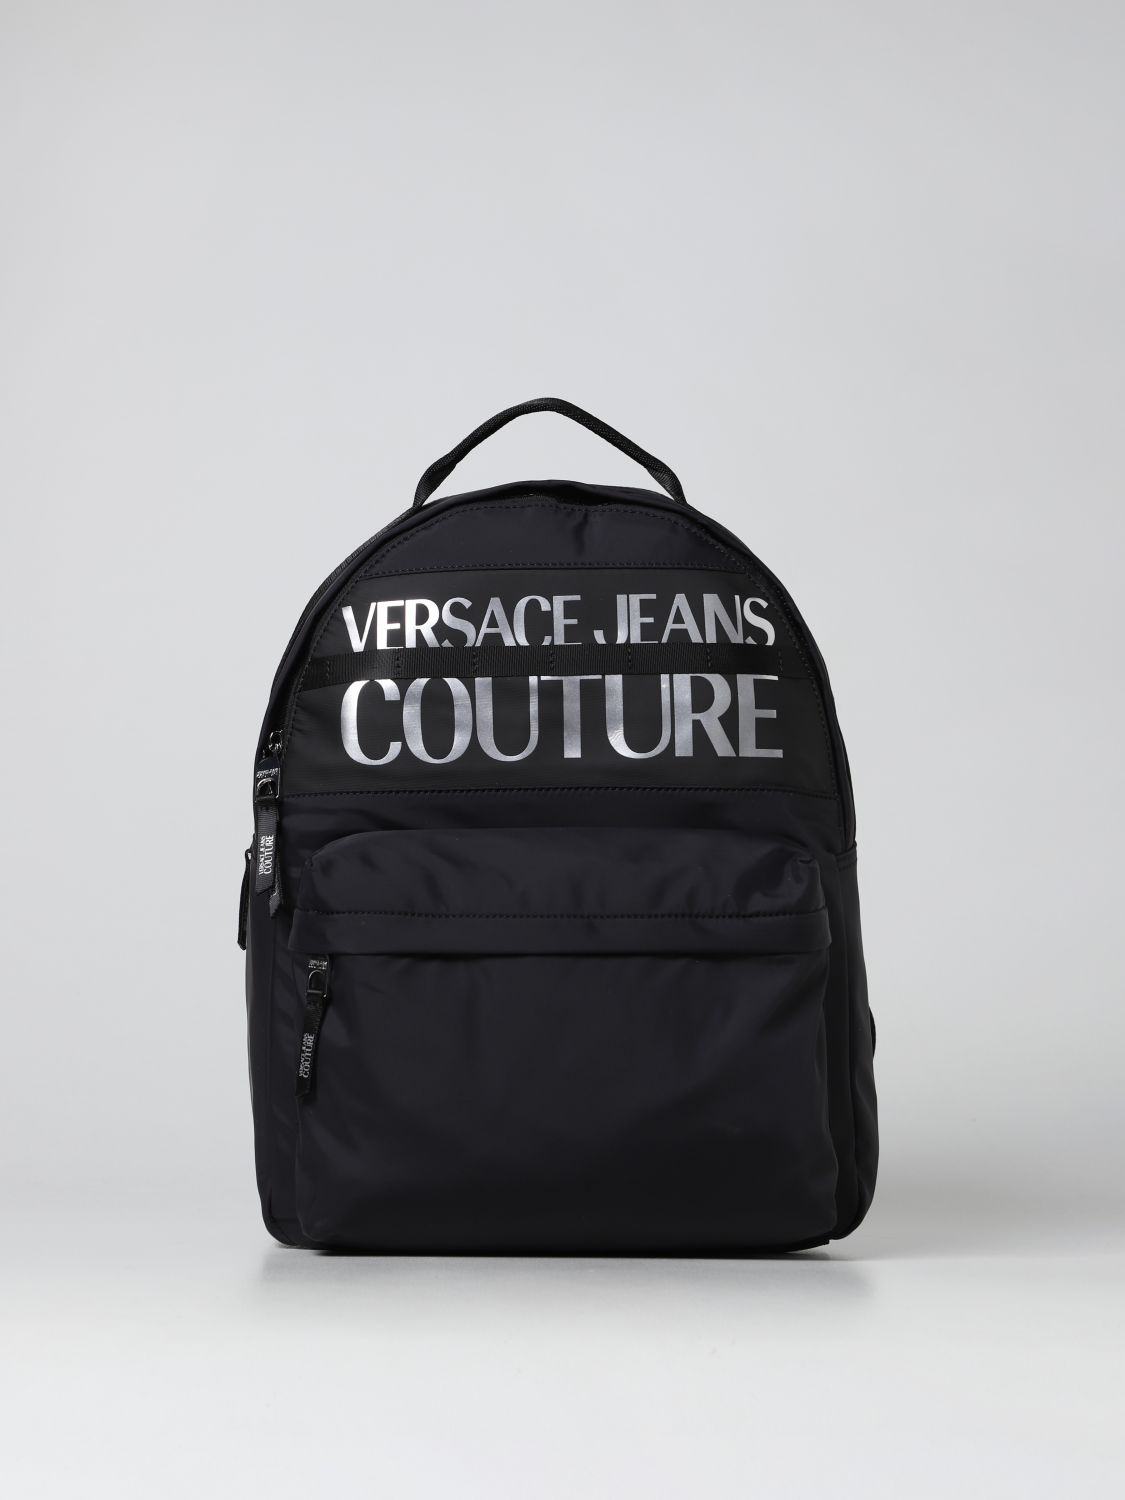 Backpack Versace Jeans Couture: Versace Jeans Couture backpack for men black 1 1